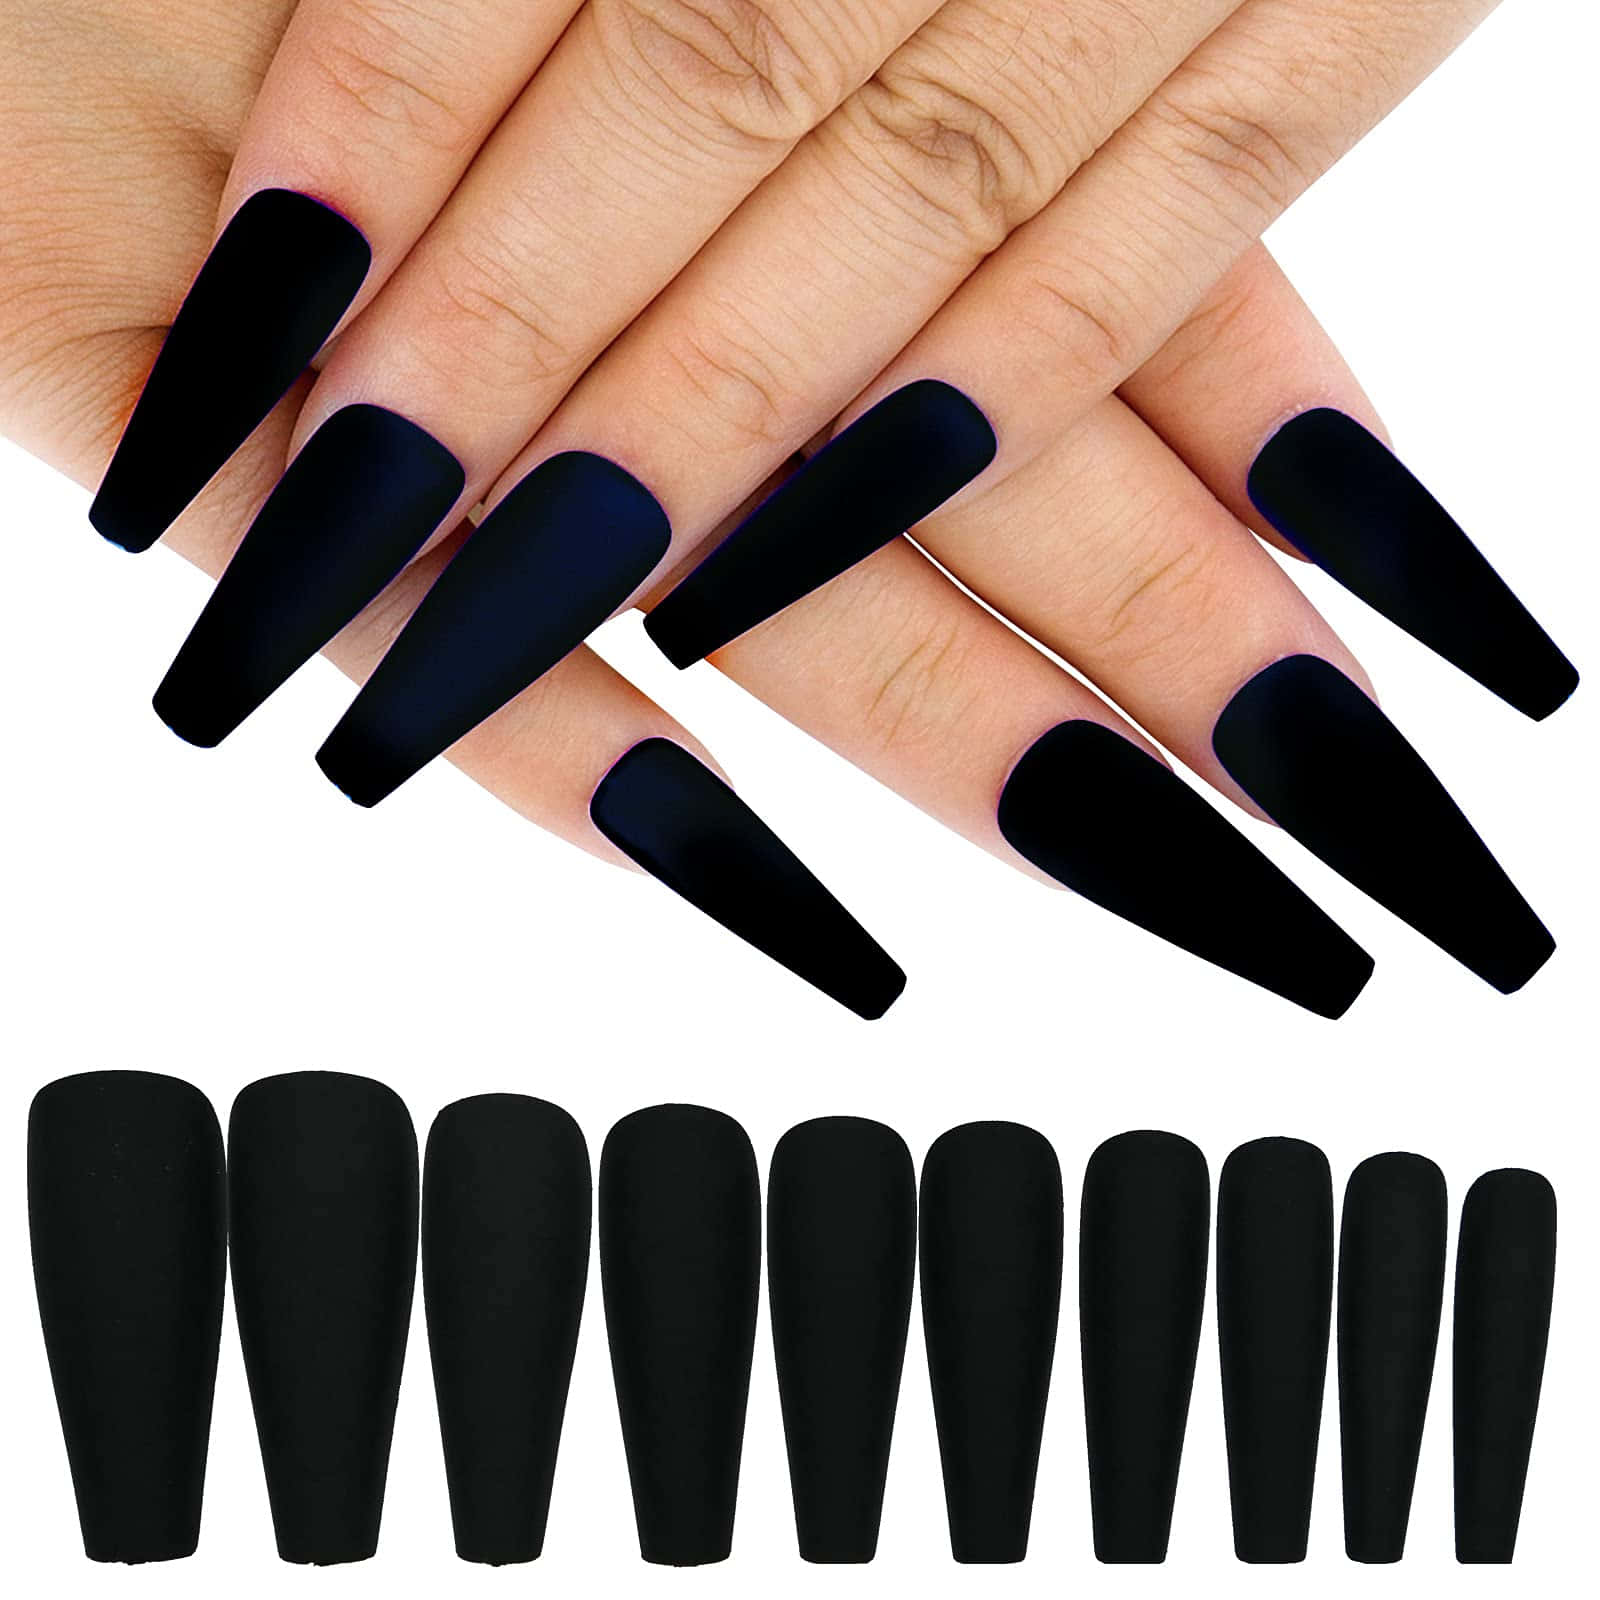 Black Acrylic Nails With Black Tips